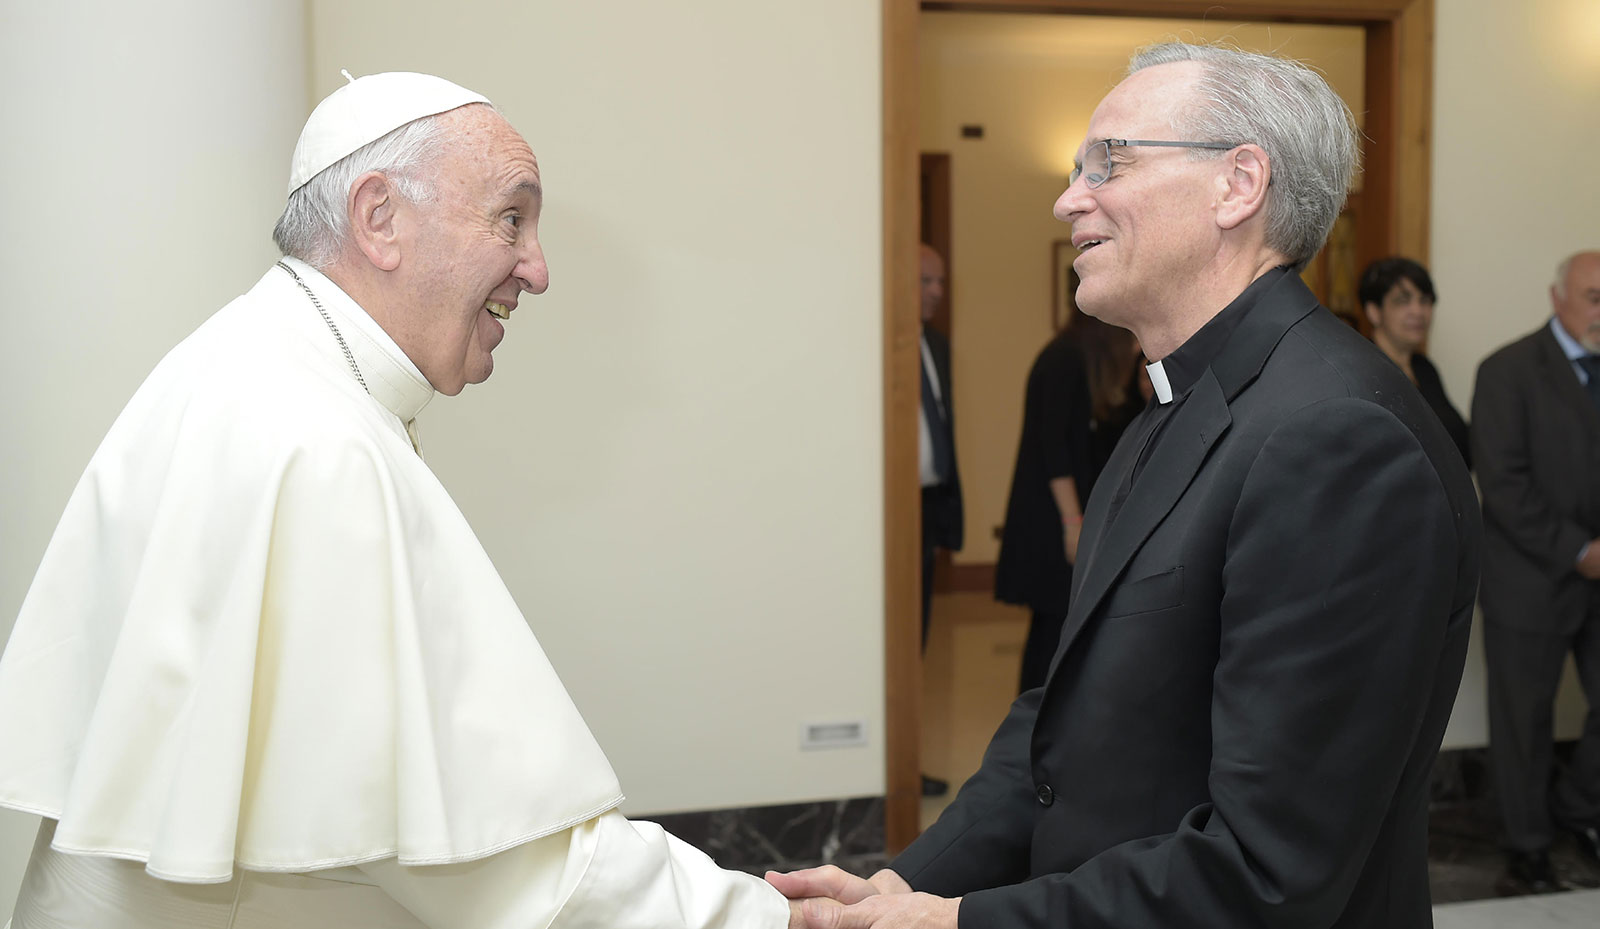 Rev. John I. Jenkins, C.S.C., met with Church leaders in Vatican City on June 13, 2017. He was a concelebrant at Mass with Pope Francis at Casa Santa Marta, the chapel inside of the hostel on Vatican grounds where the pope resides.